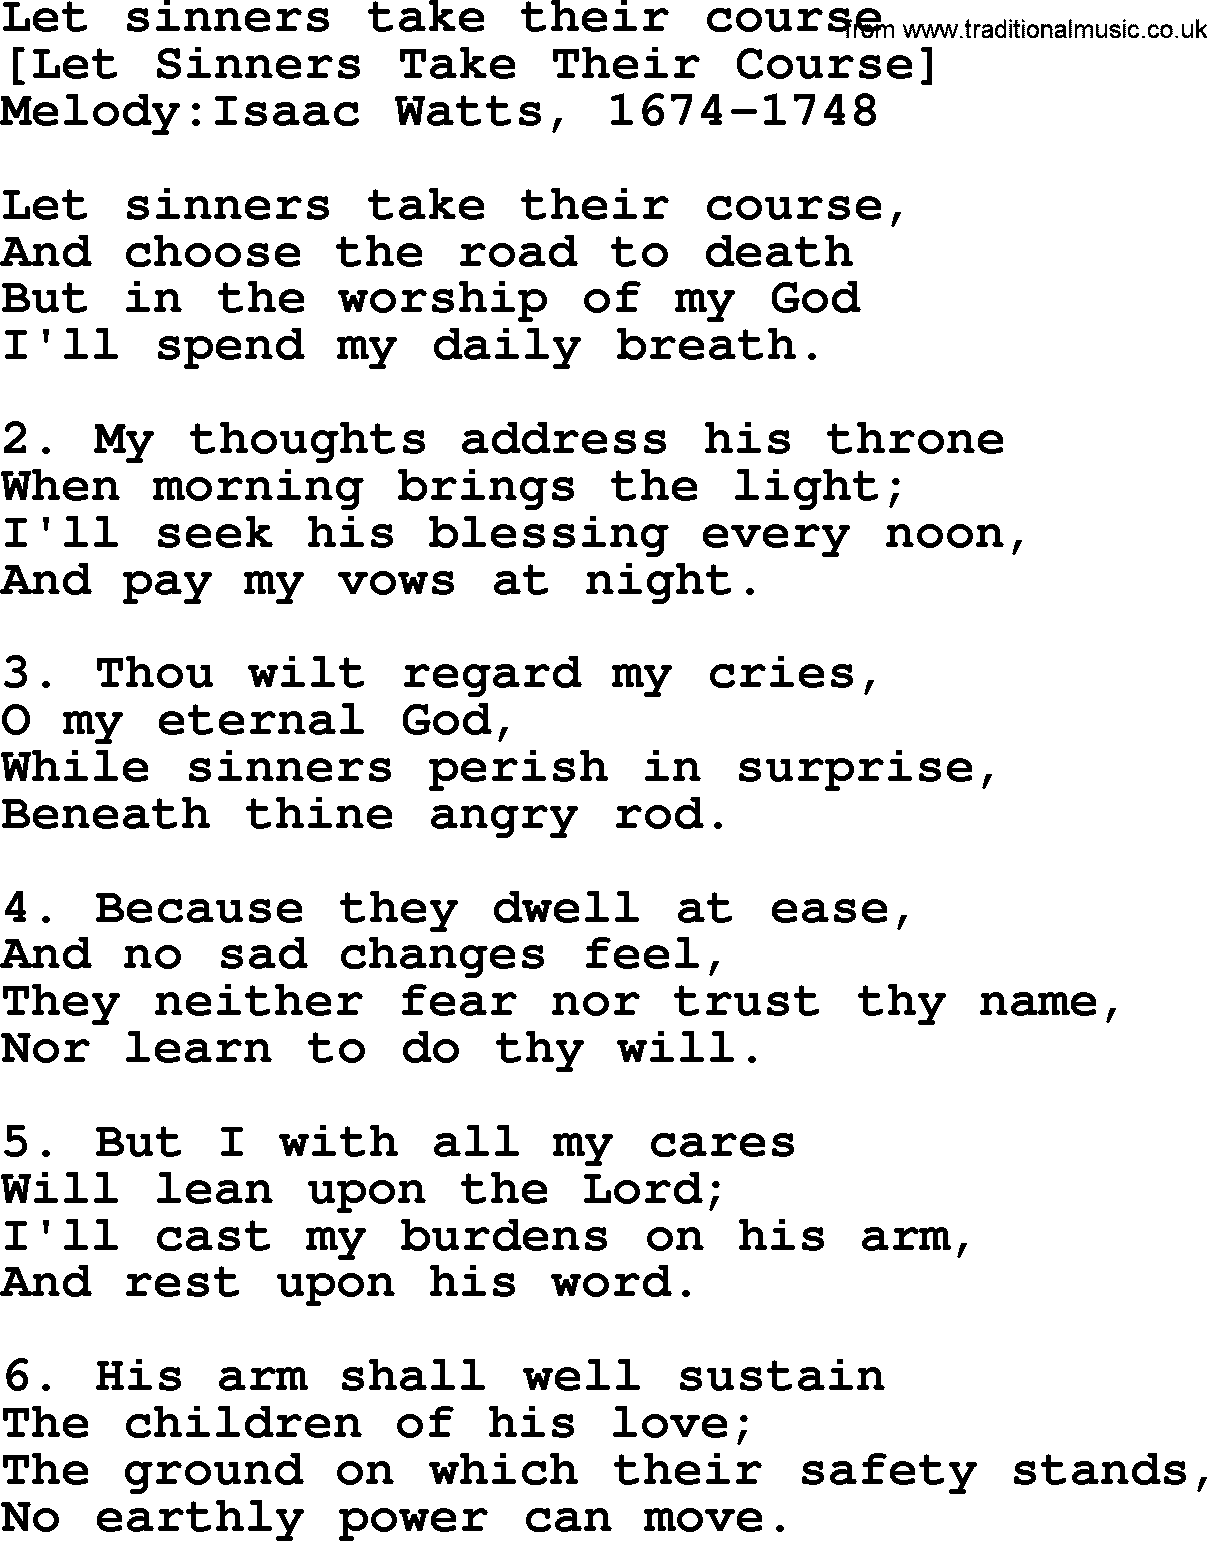 Old English Song: Let Sinners Take Their Course lyrics